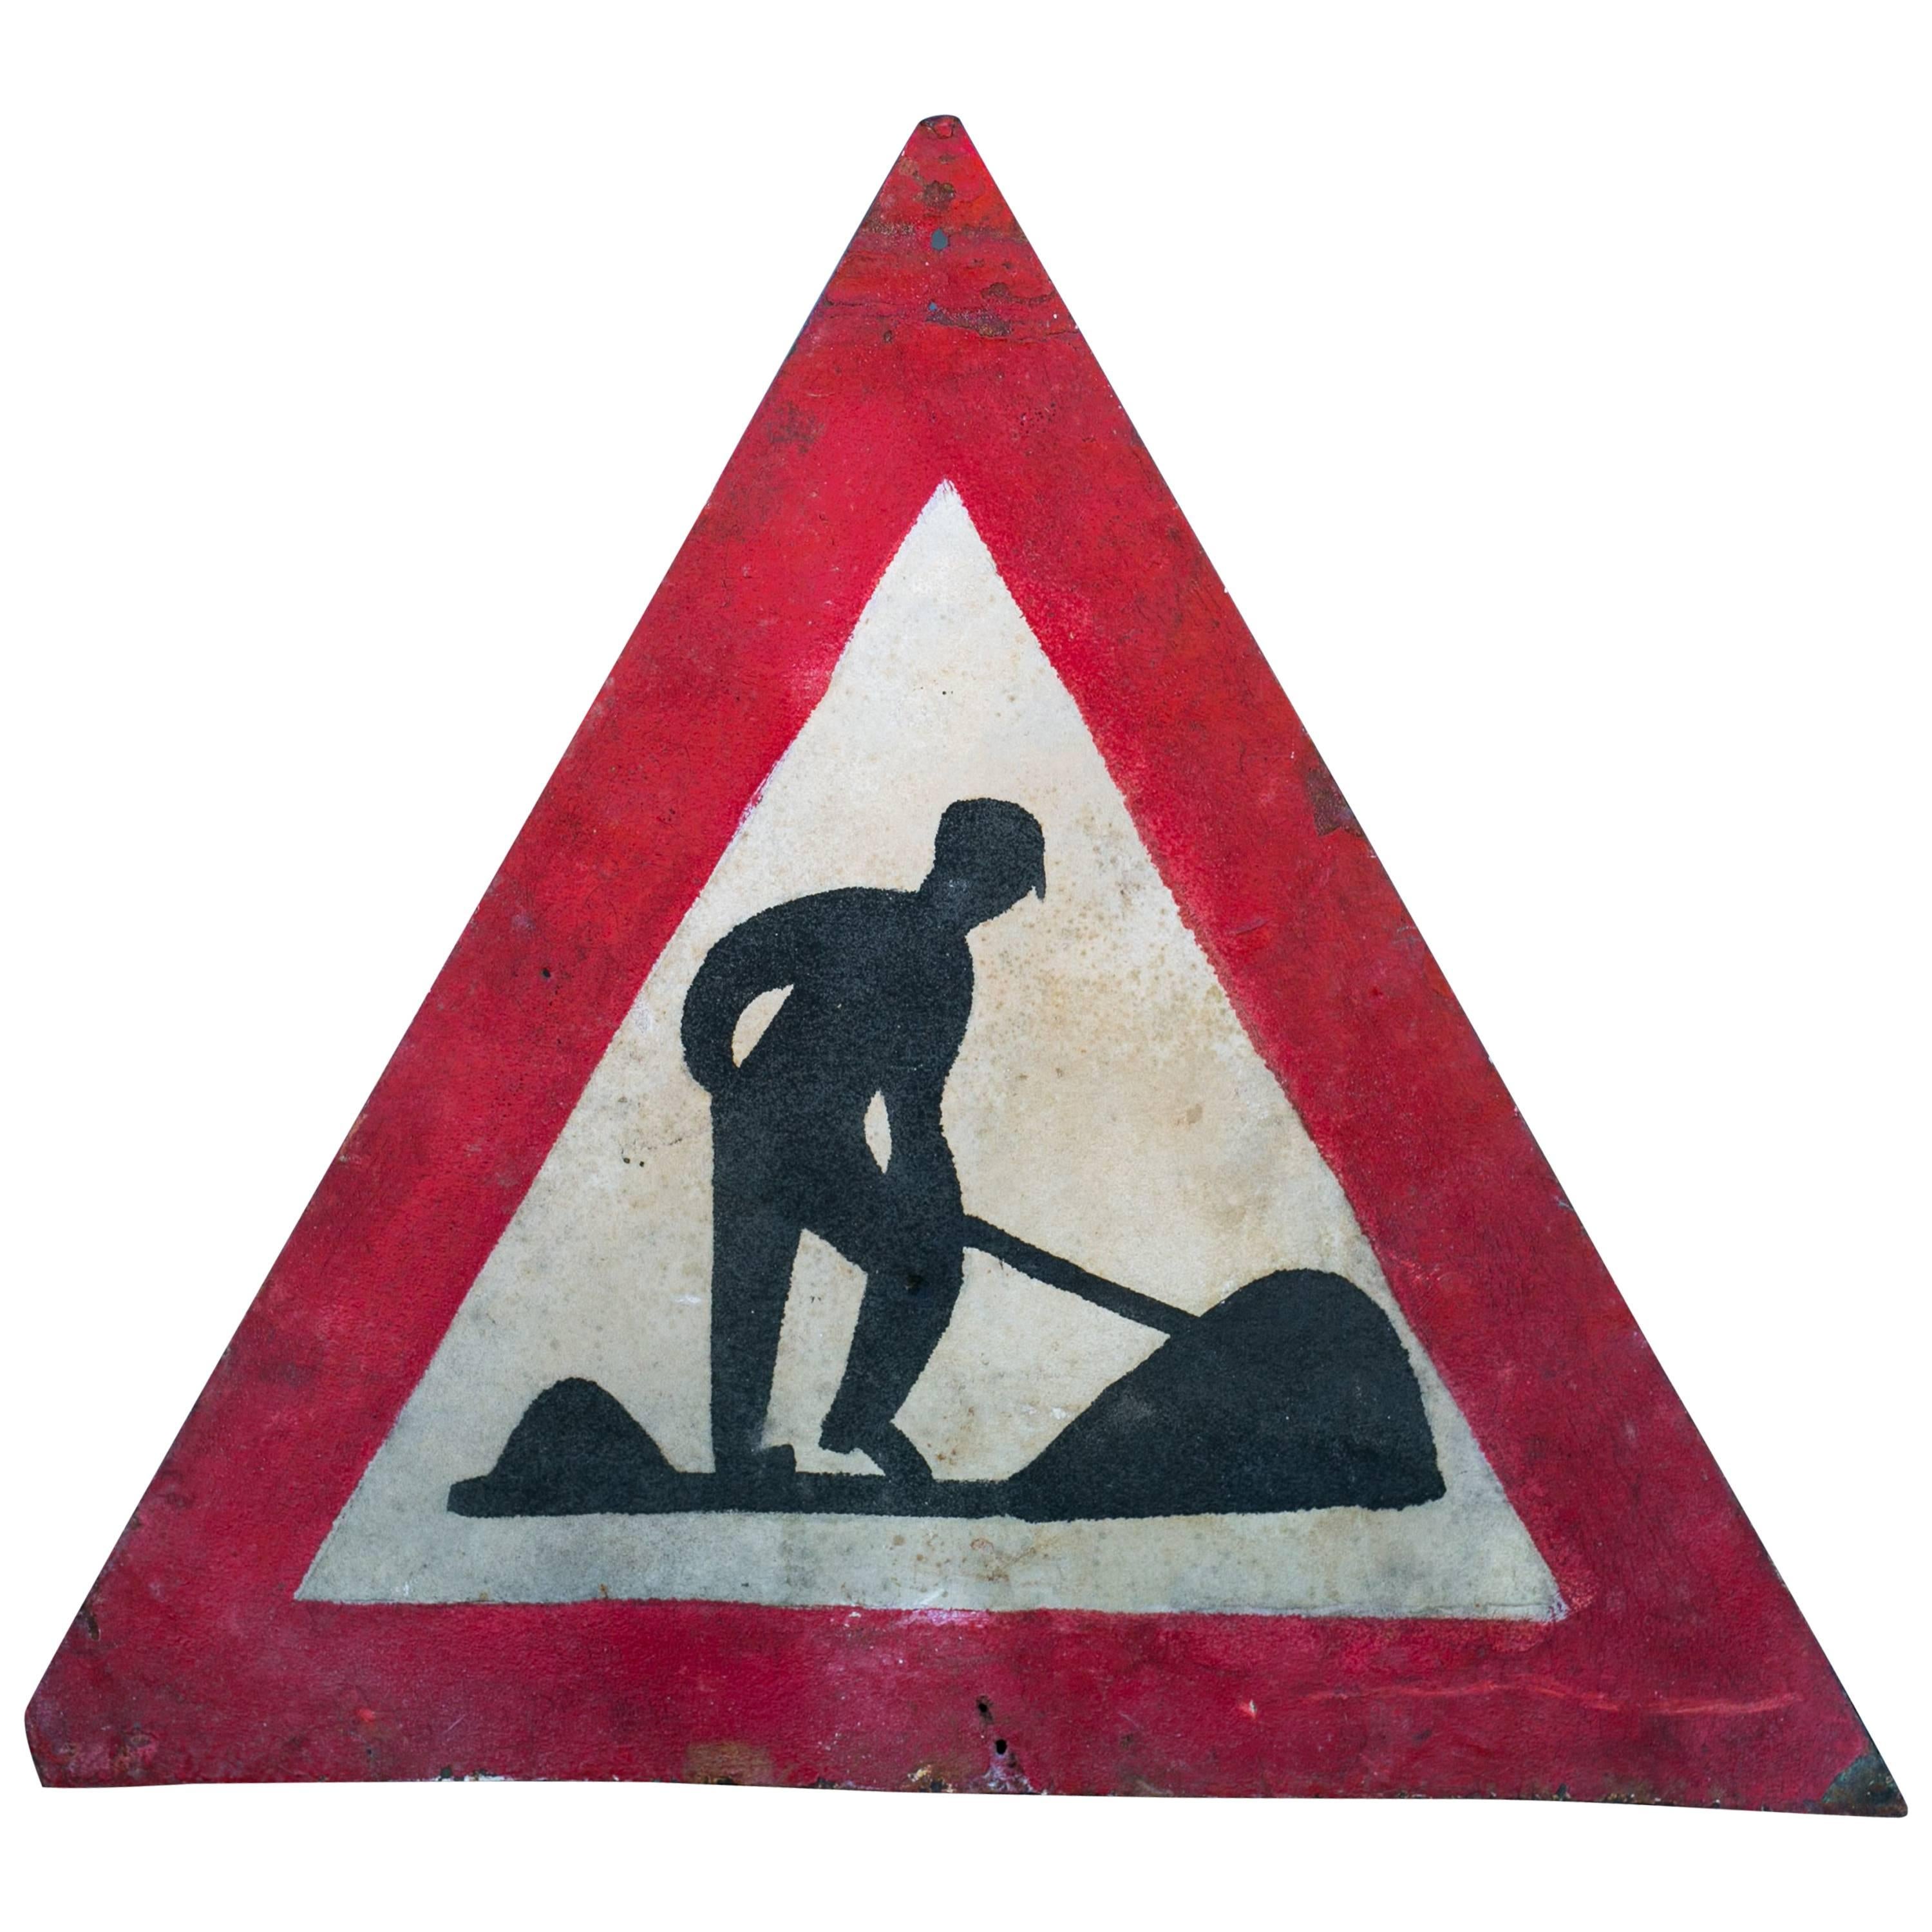 Graphic French Hand-Painted Red and Black Triangle Road Safety Sign, circa 1930